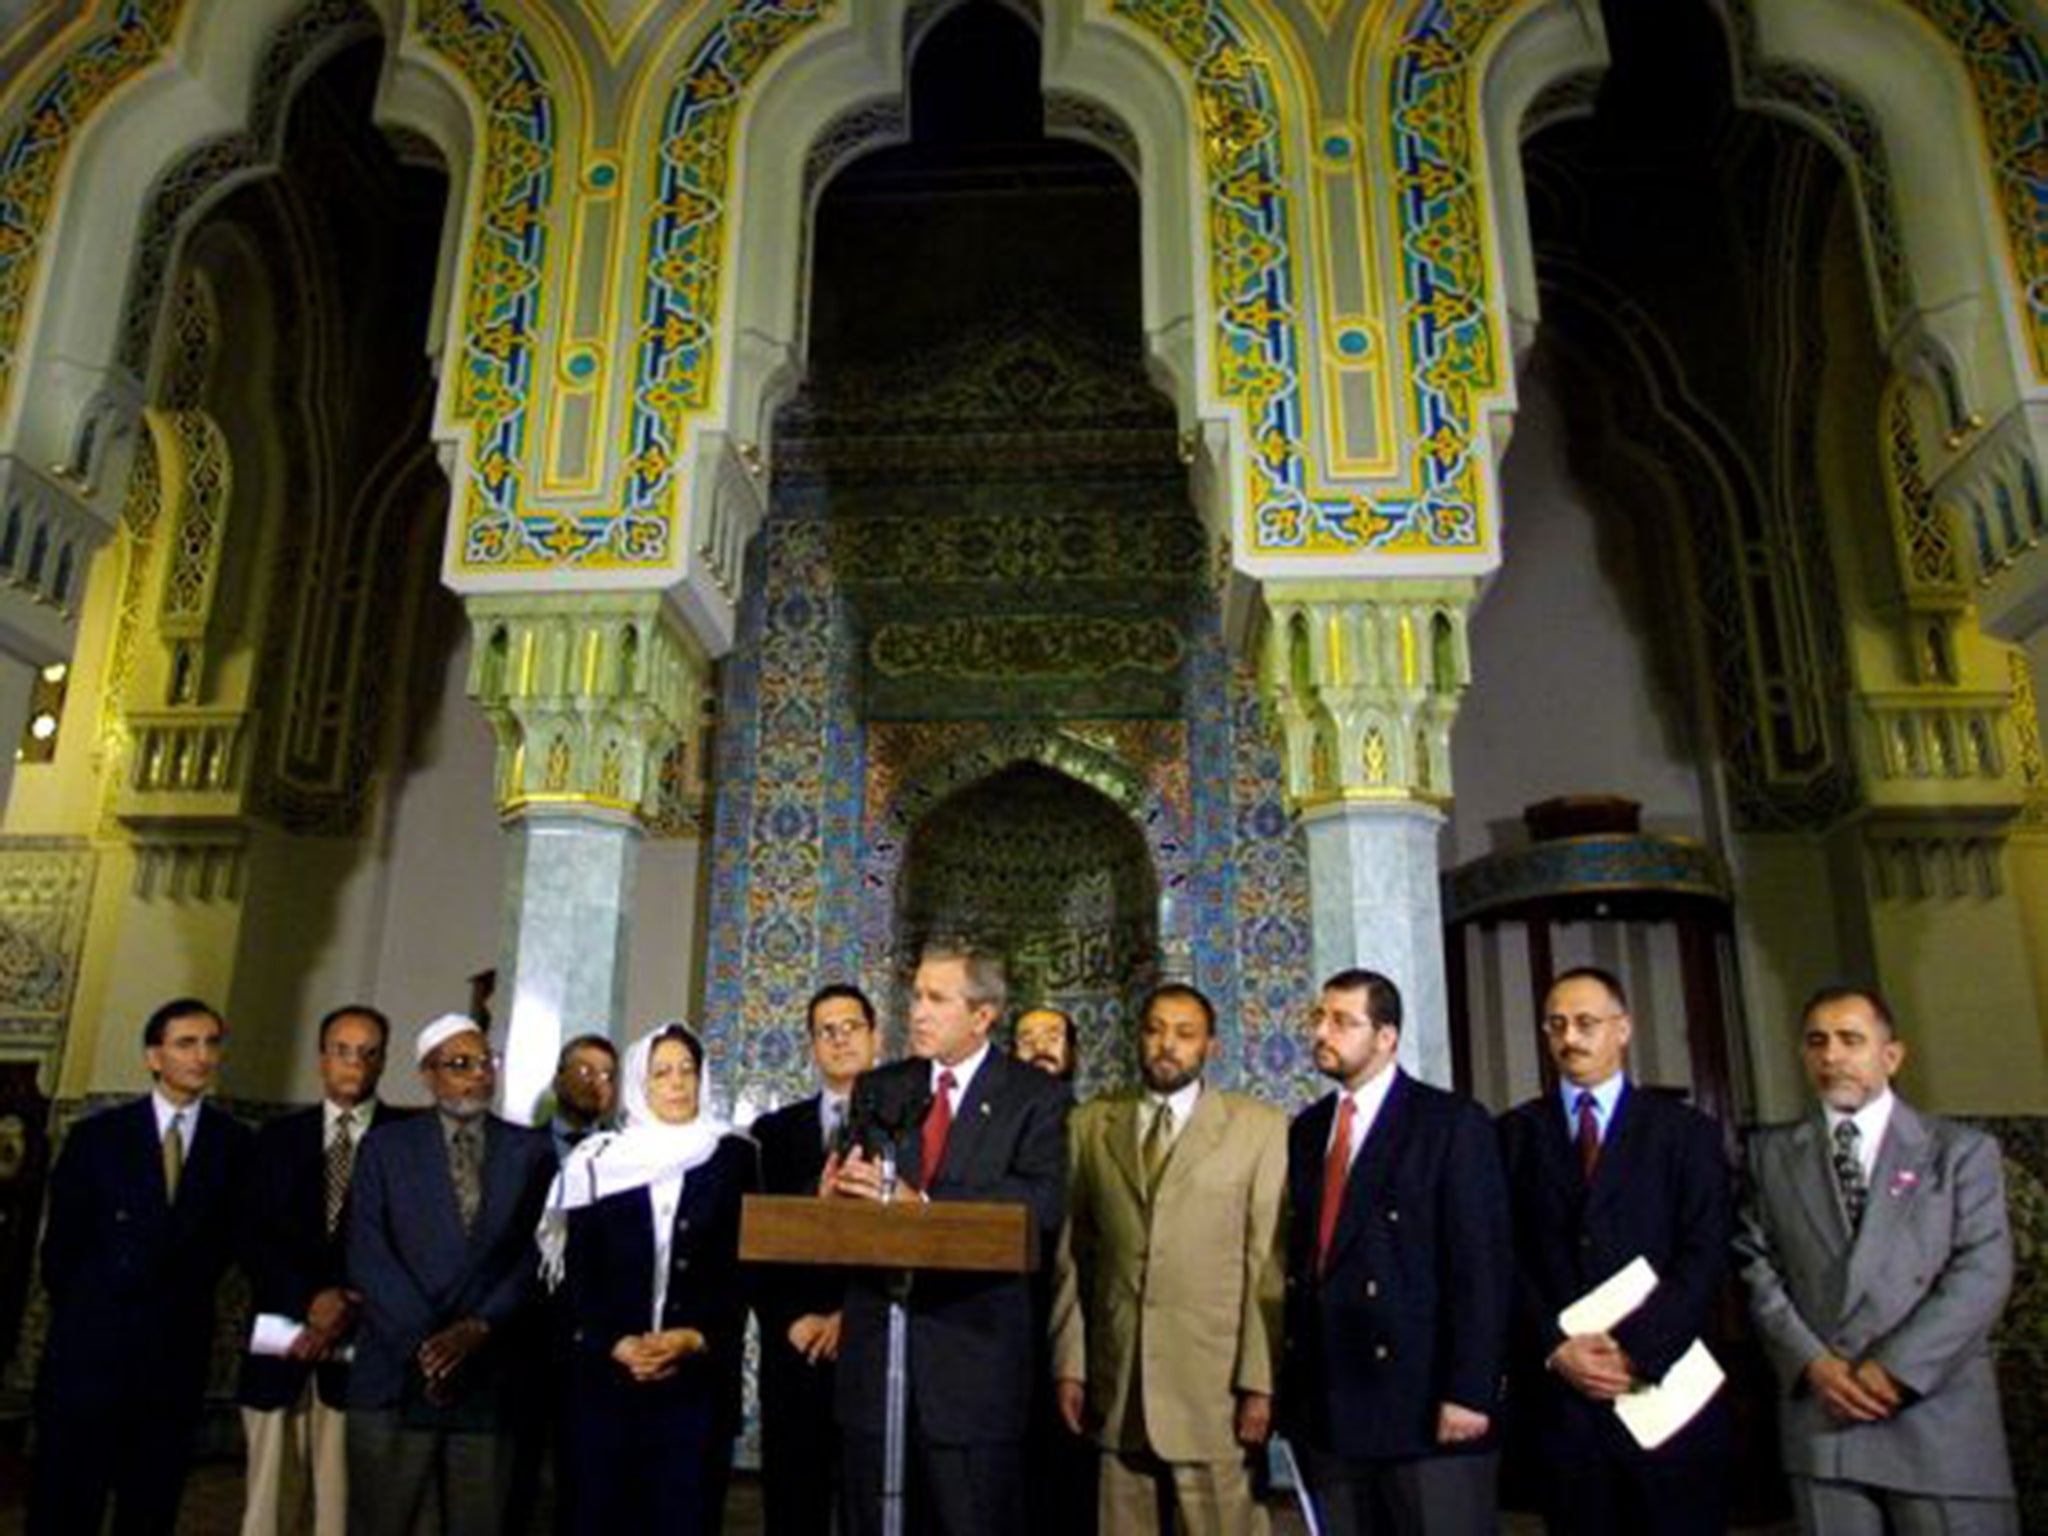 Unlike others in his party, George Bush tried to build bridges with US Muslims, visiting Washington’s Islamic Center days after 9/11